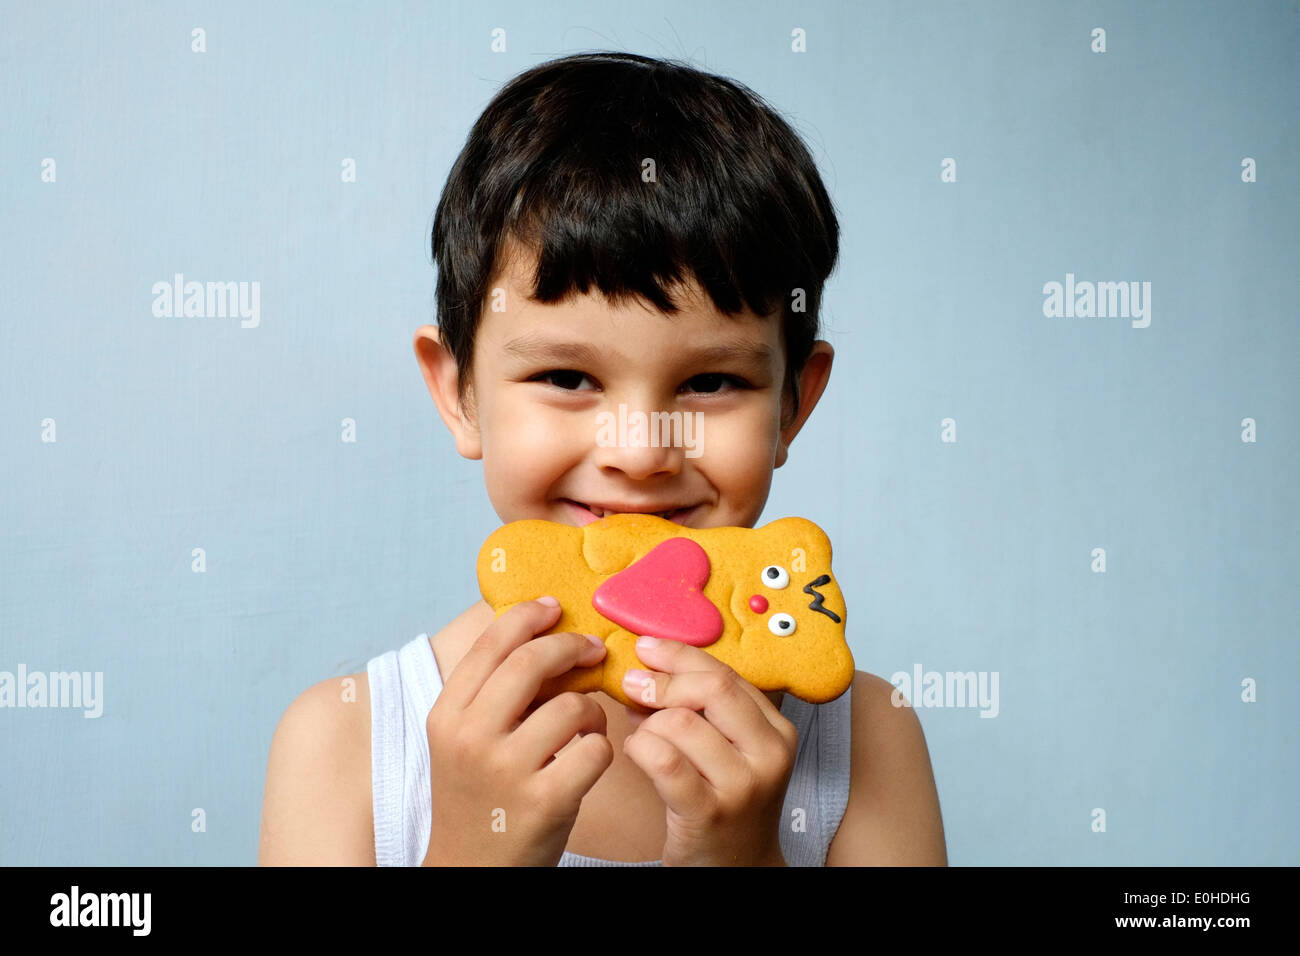 smiling happy little boy eating a decorated gingerbread man Stock Photo